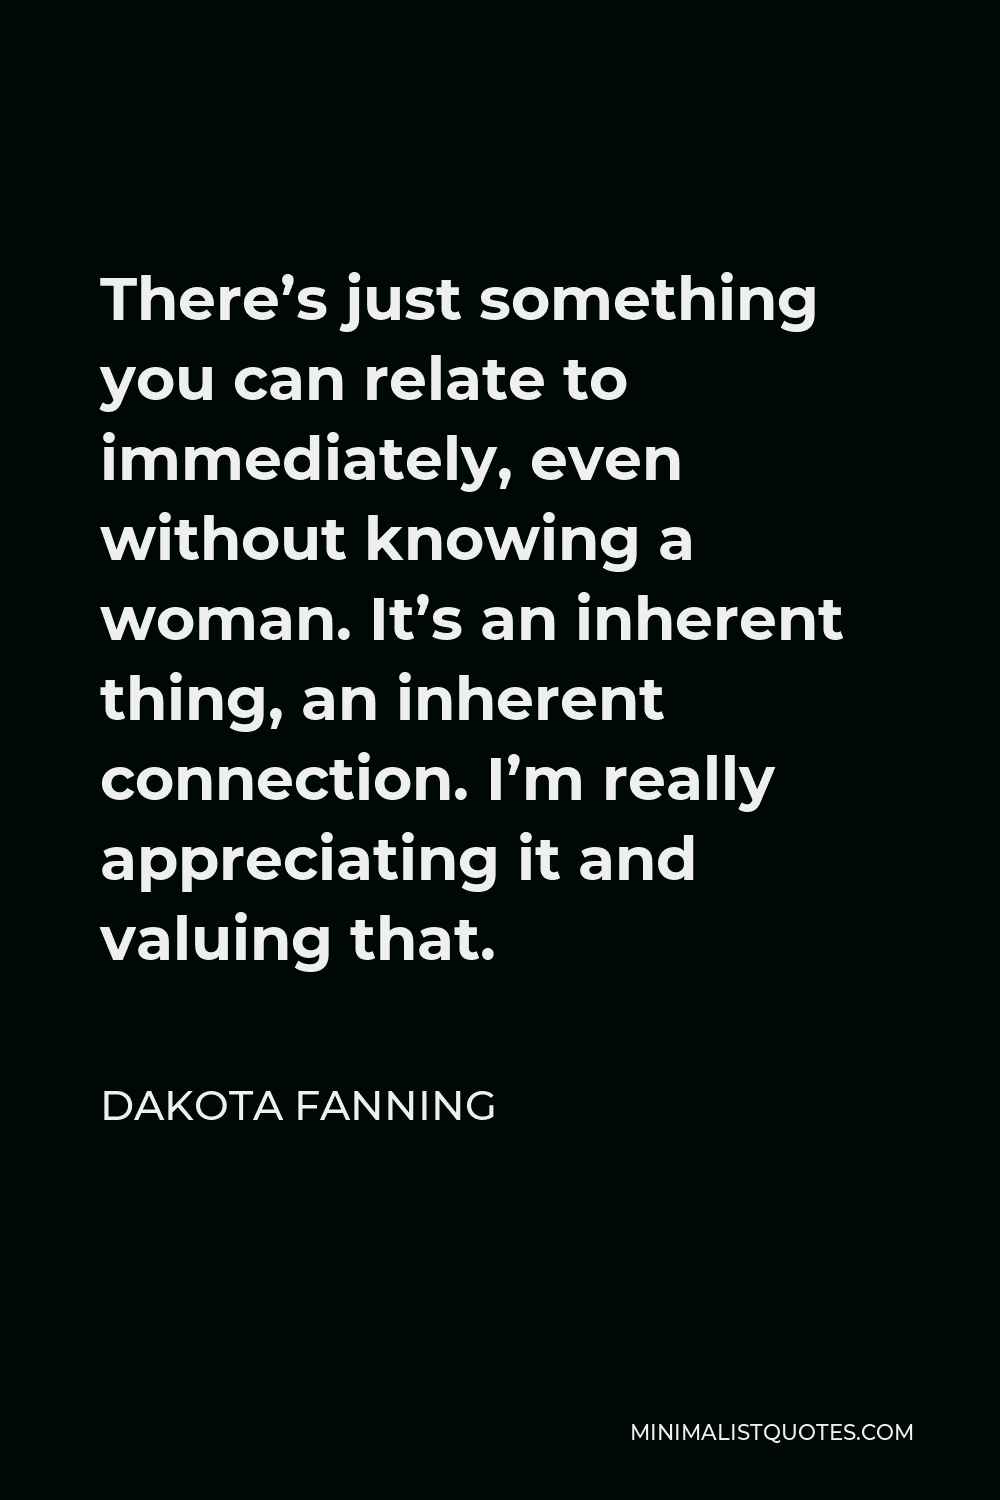 Dakota Fanning Quote - There’s just something you can relate to immediately, even without knowing a woman. It’s an inherent thing, an inherent connection. I’m really appreciating it and valuing that.